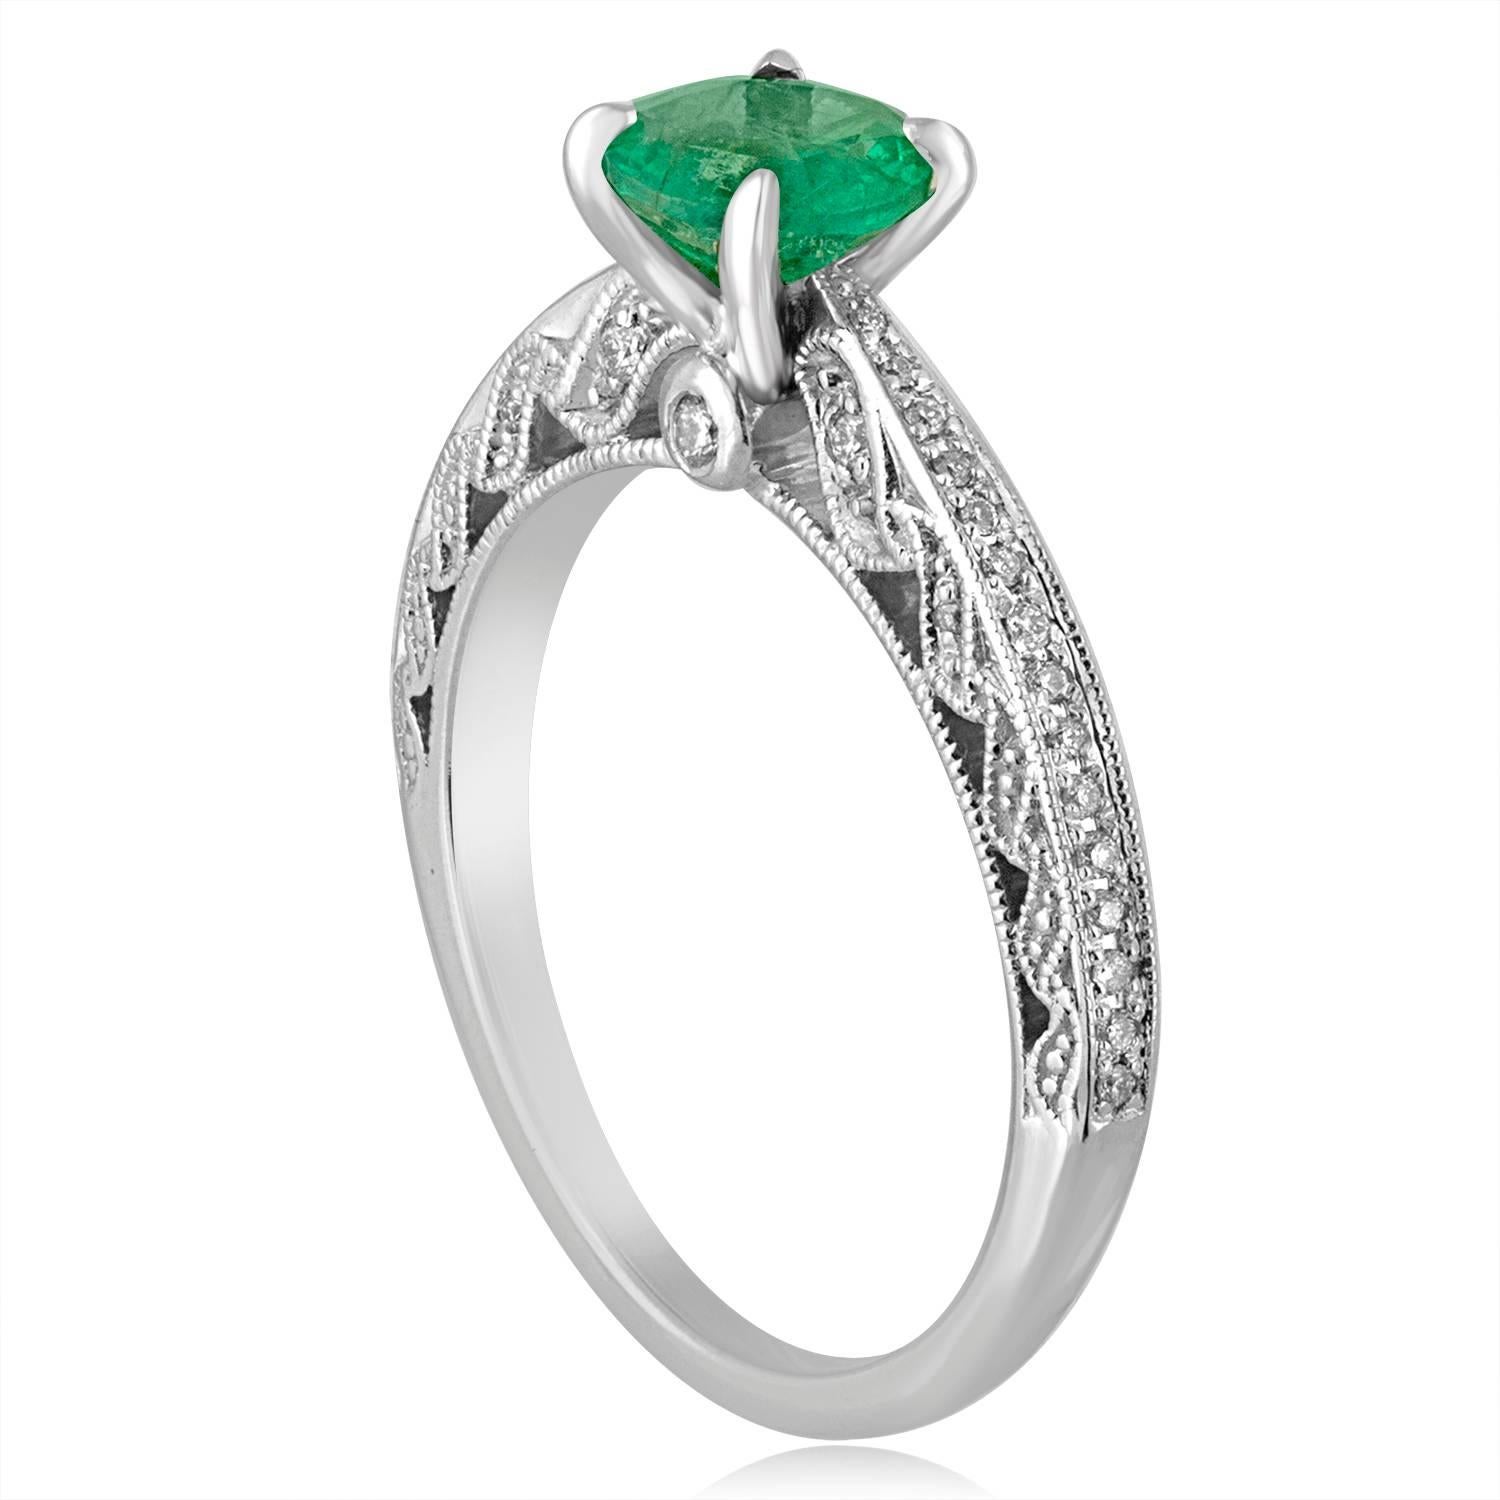 Stunningly Simple Emerald Milgrain Ring
The ring is 14K White Gold.
The Emerald is a round 0.72 Carat Natural Emerald
There are 0.25 Carats in Diamonds F SI
The ring is a size 6.5, sizable.
The ring weighs 3.2 grams